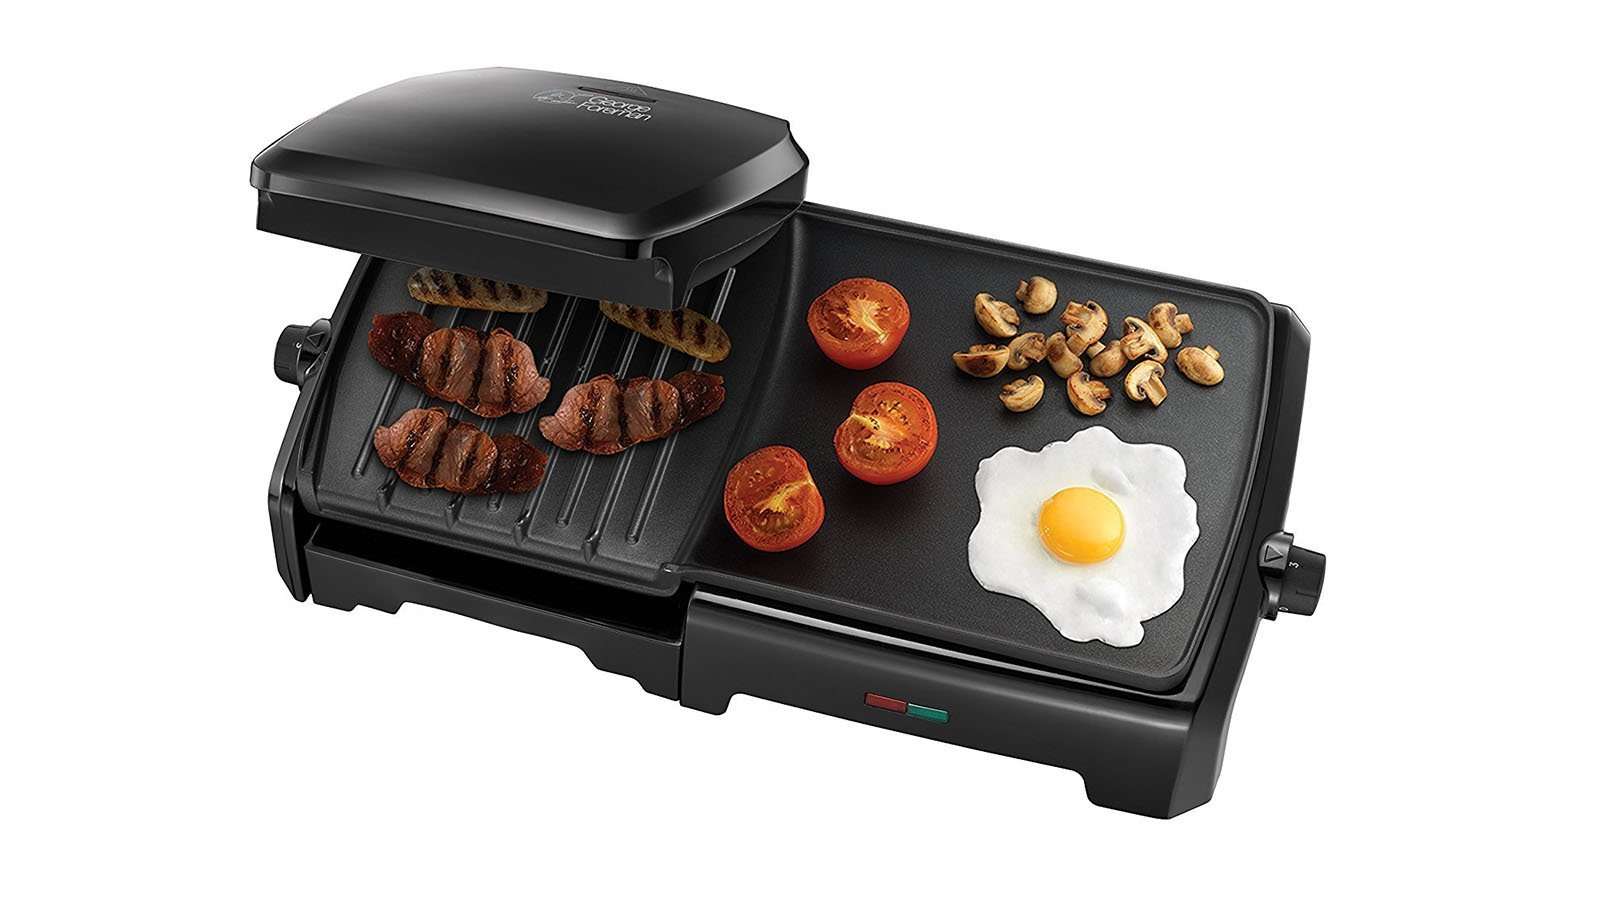 How Hot Does A George Foreman Grill Get